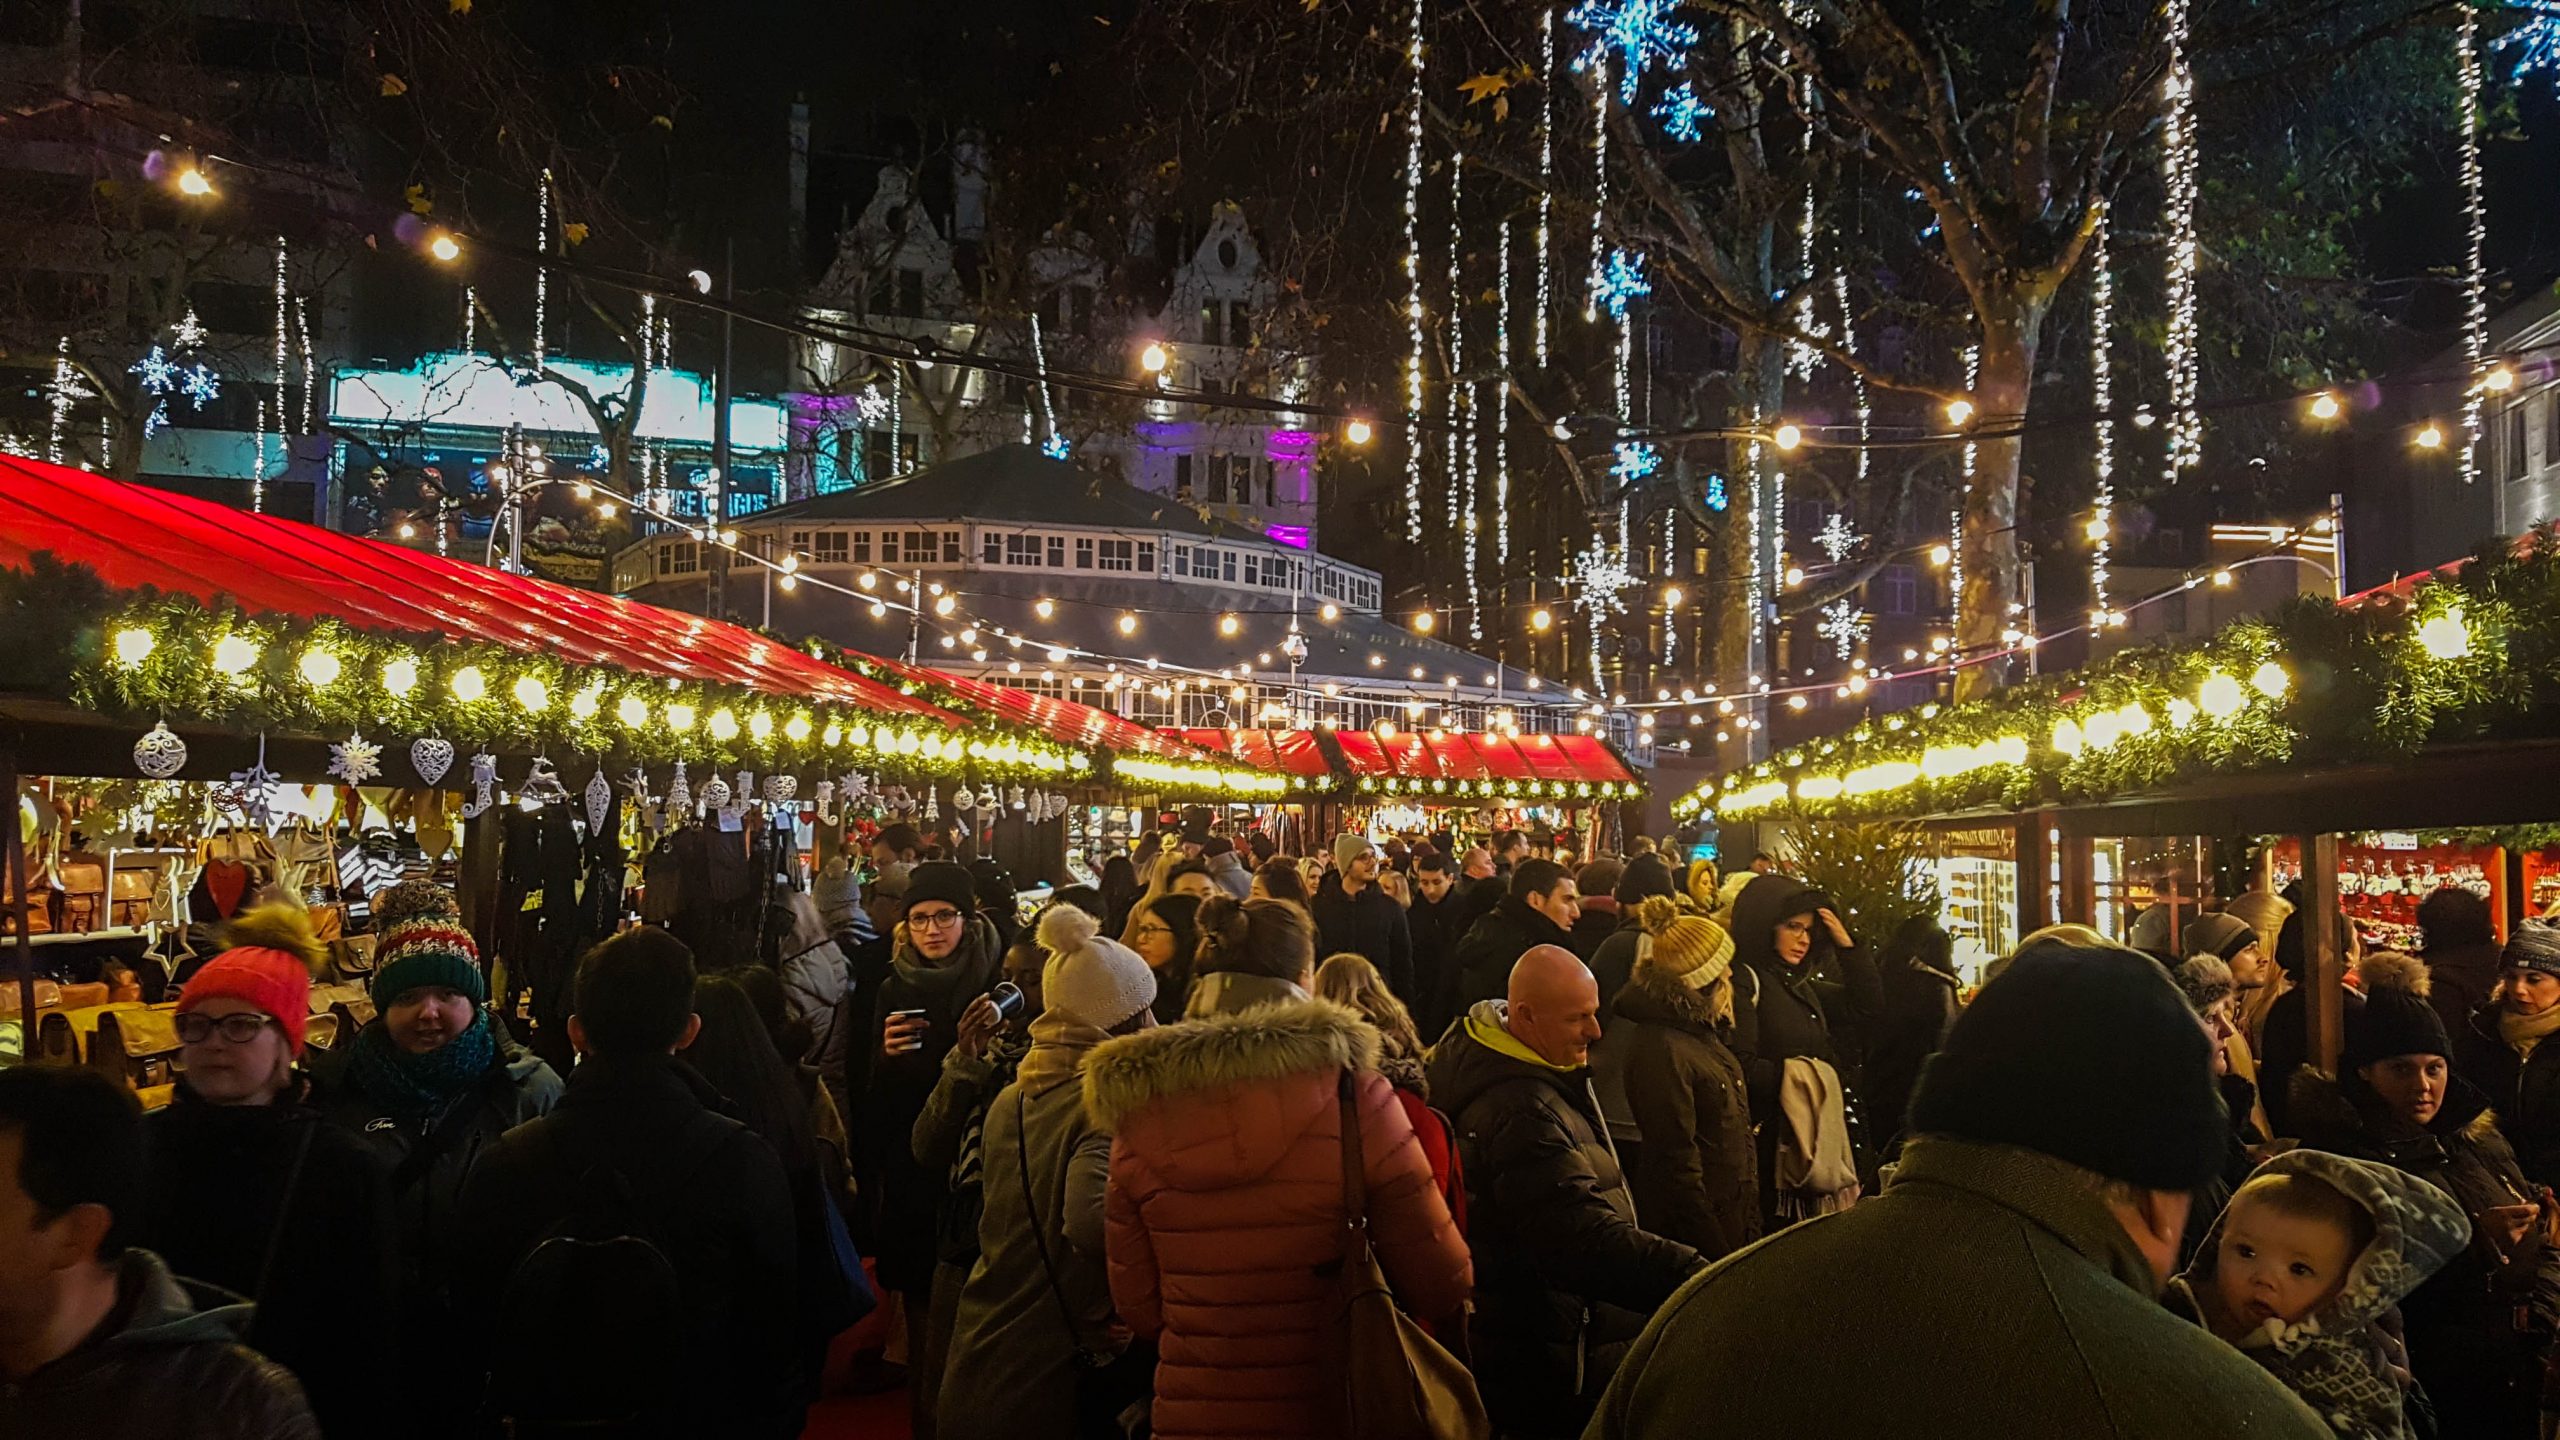 Christmas market and lights in London